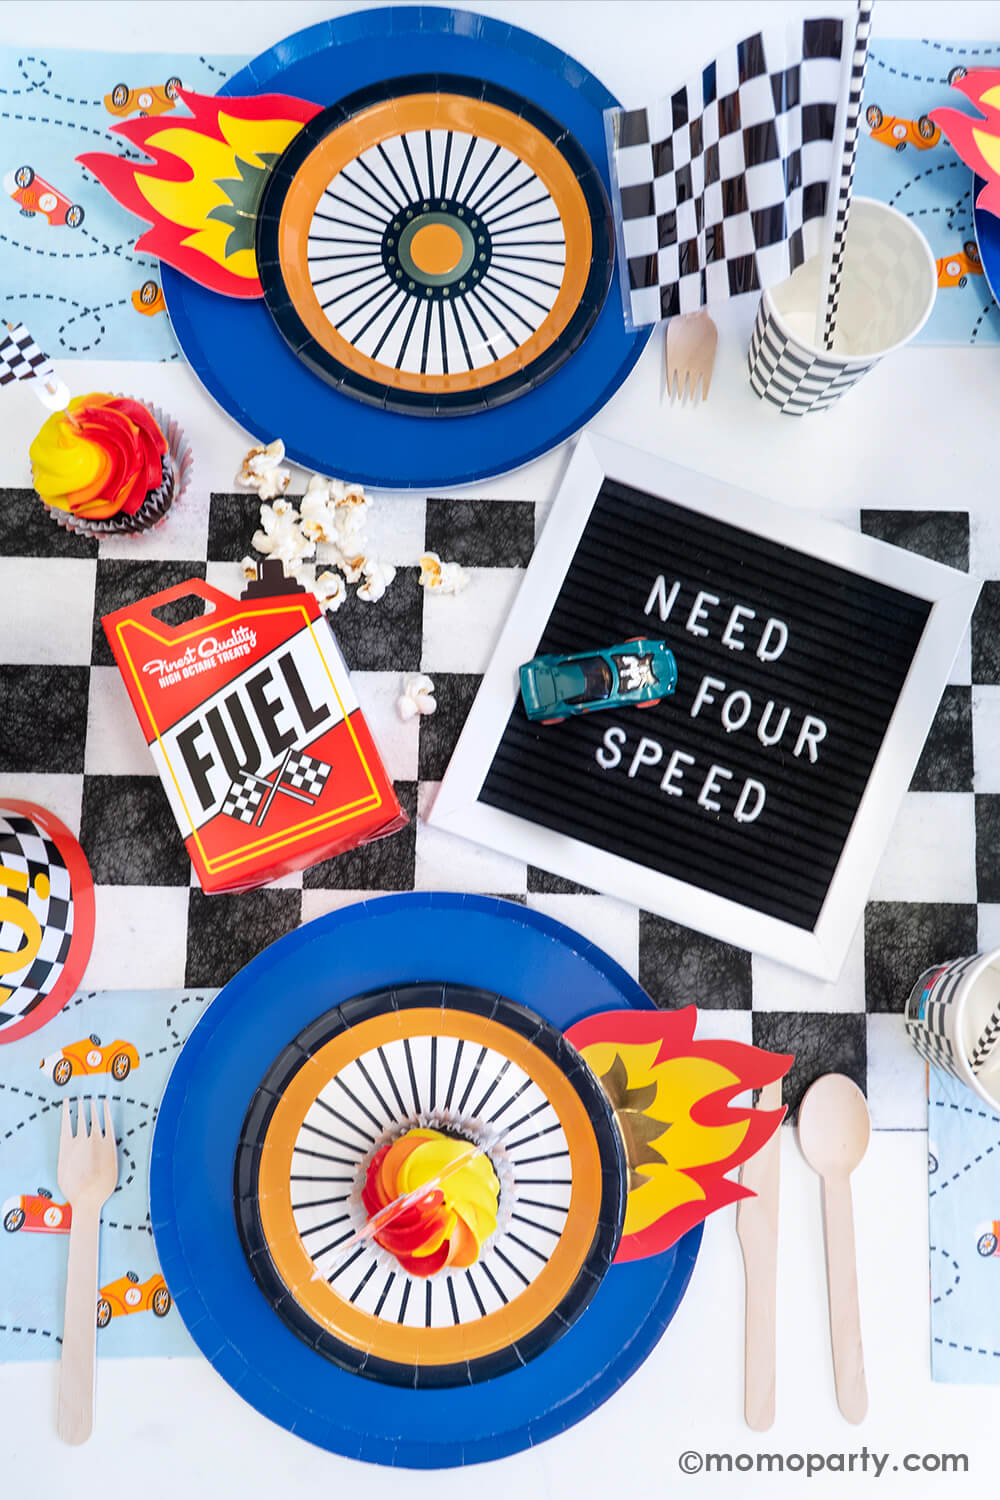 A flatlay shot of a festive "Need FOUR Speed" Hot Wheels themed fourth birthday party table featuring Momo Party's midnight dinner plates with wheel shaped plates, checkered table runner, party cups, paper straws, birthday hats, Fuel gas shaped treat box with popcorn and blue race car napkins . In the middle of the table, there's a black letterboard spelling "NEED FOR SPEED" and a Hot Wheels toy car next to it - a perfect inspo for boy's 4th birthday party.